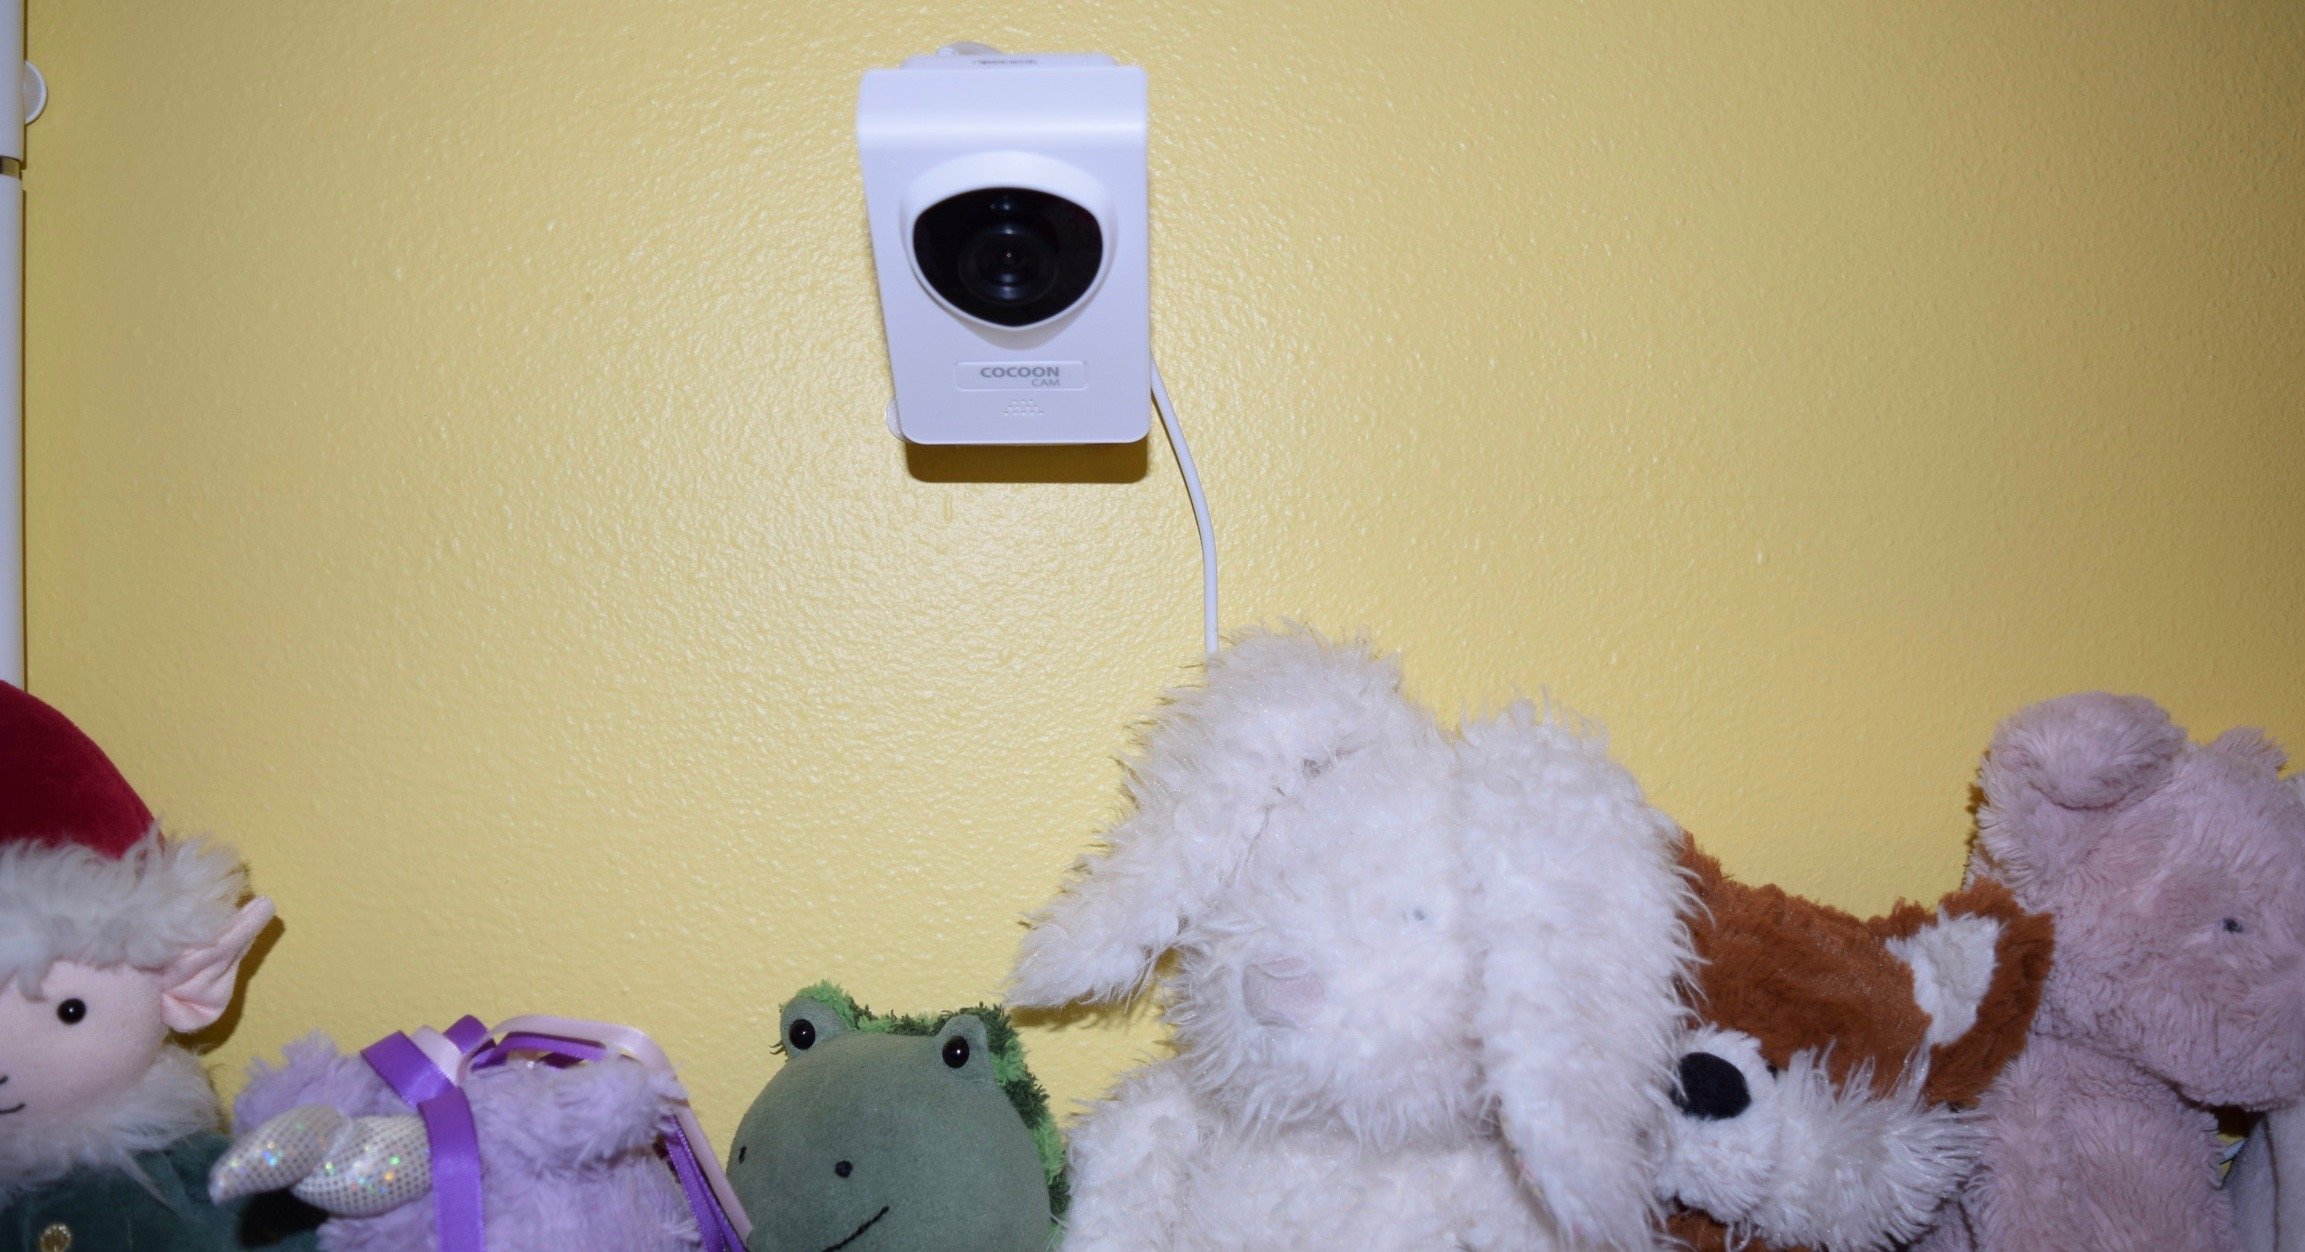 A Cocoon Cam mounted on a yellow wall above a crib with stuffed animals on the railing